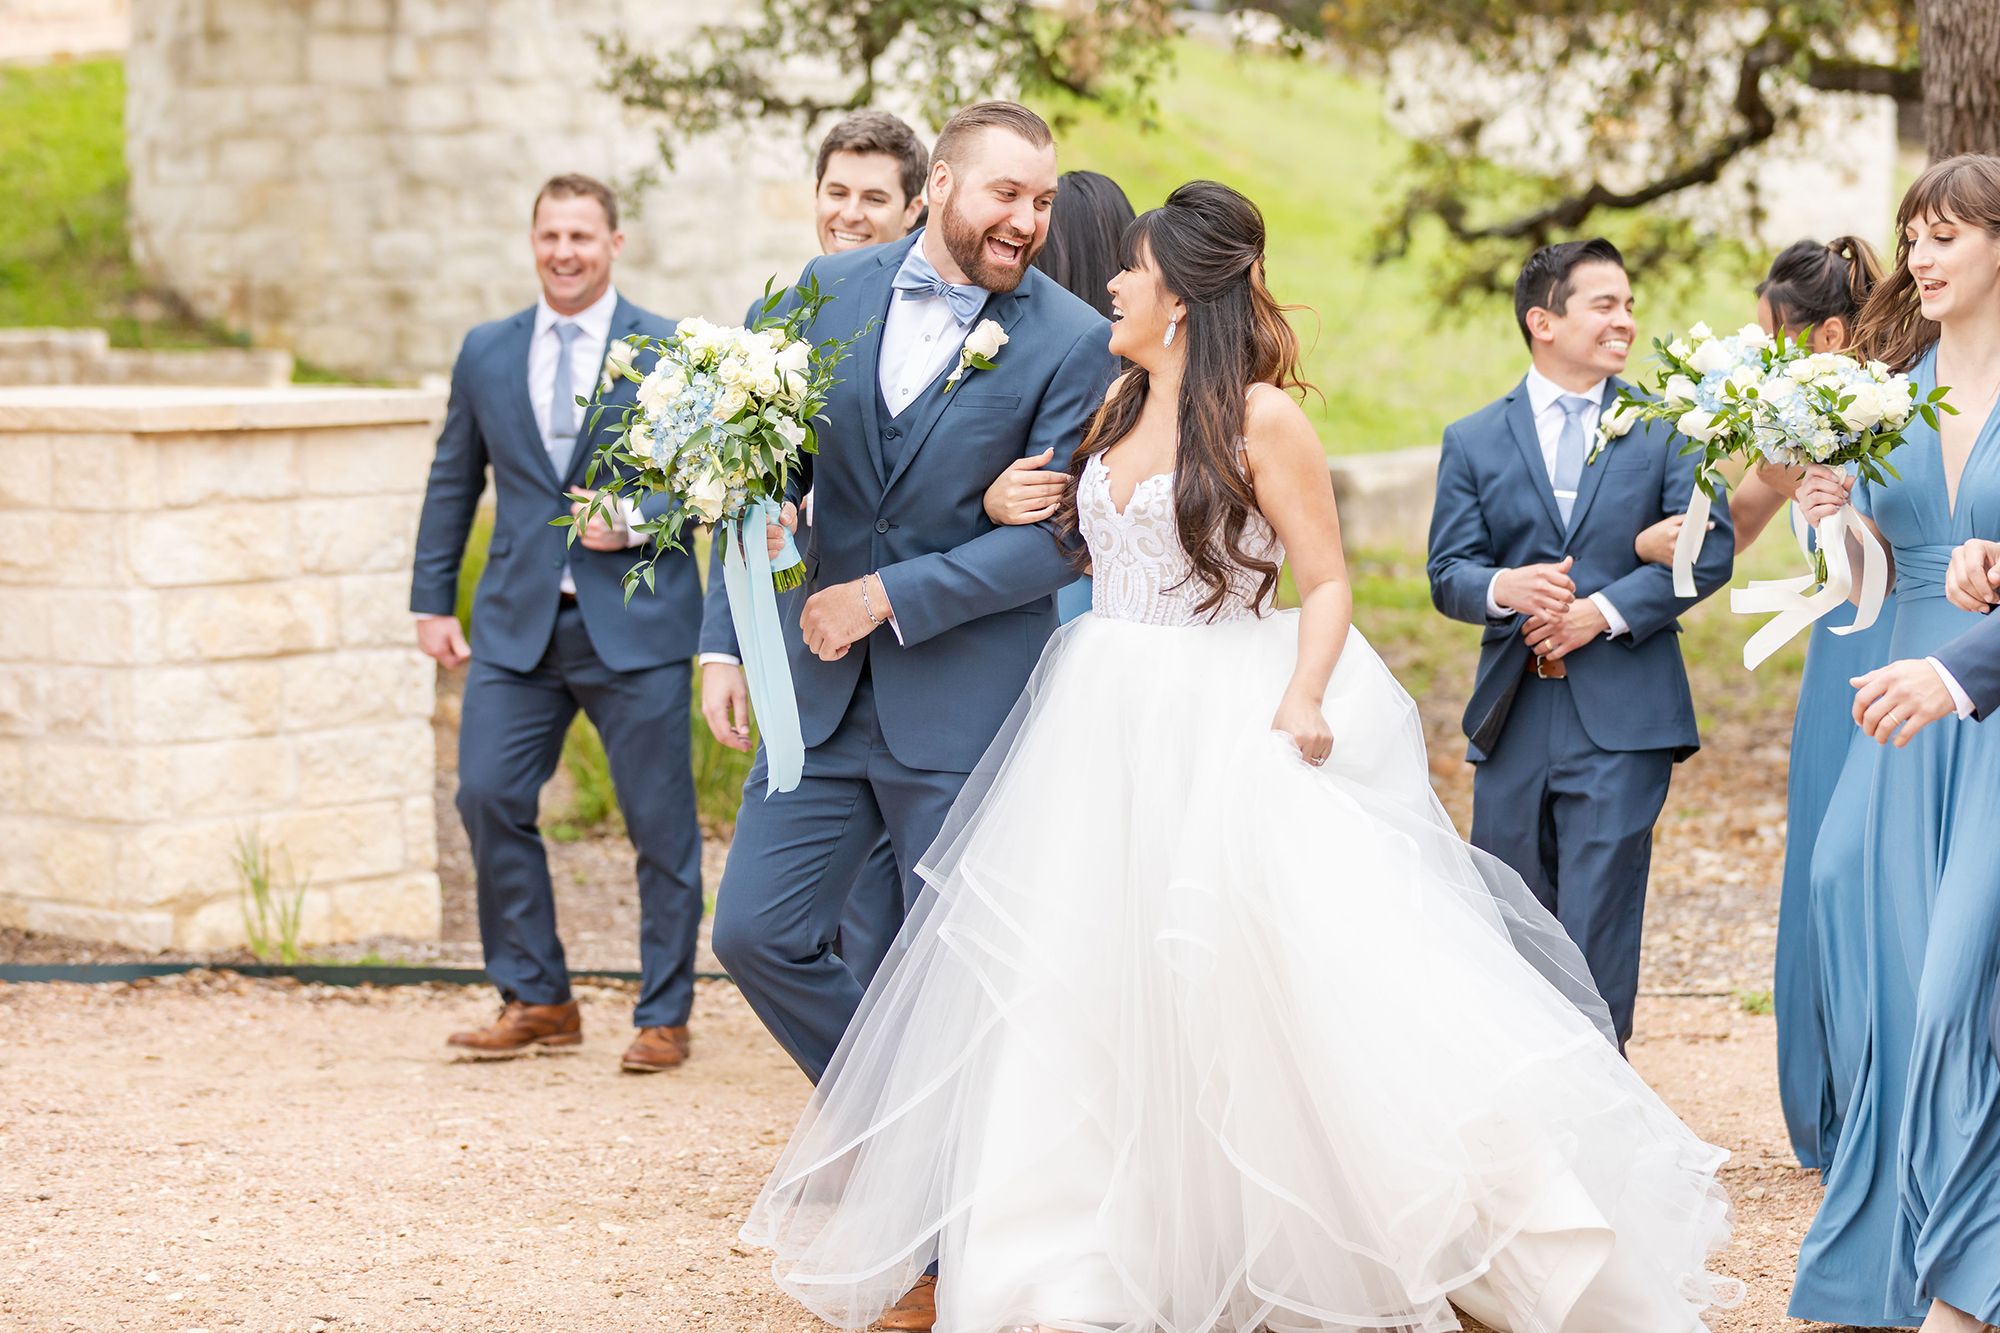 candid photo of a groom in a blue suit and bride walking together while smiling at each other